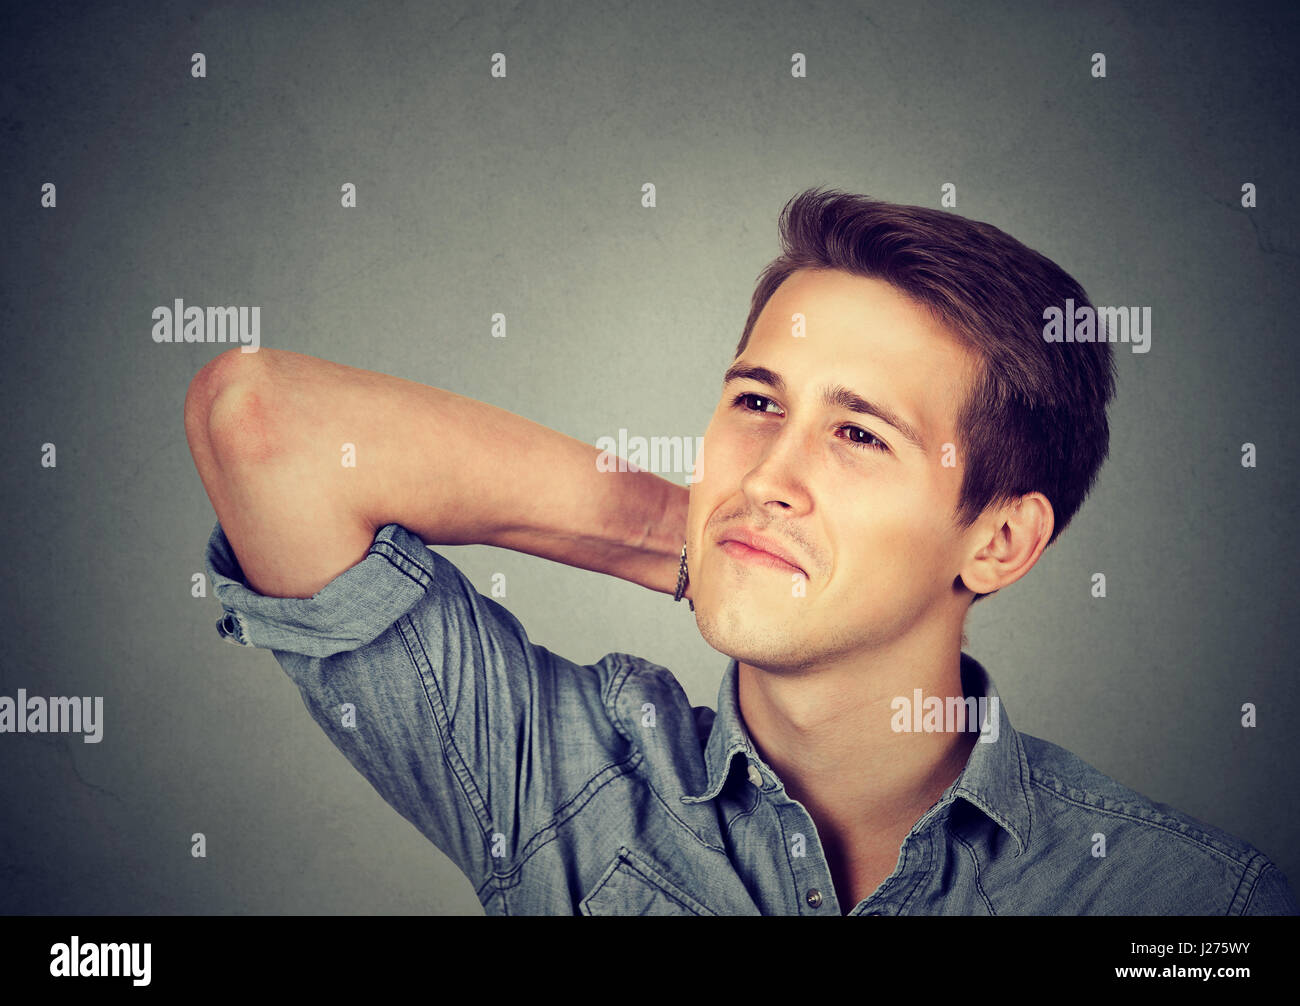 Happy young man thinking daydreaming looking up isolated on gray wall background Stock Photo